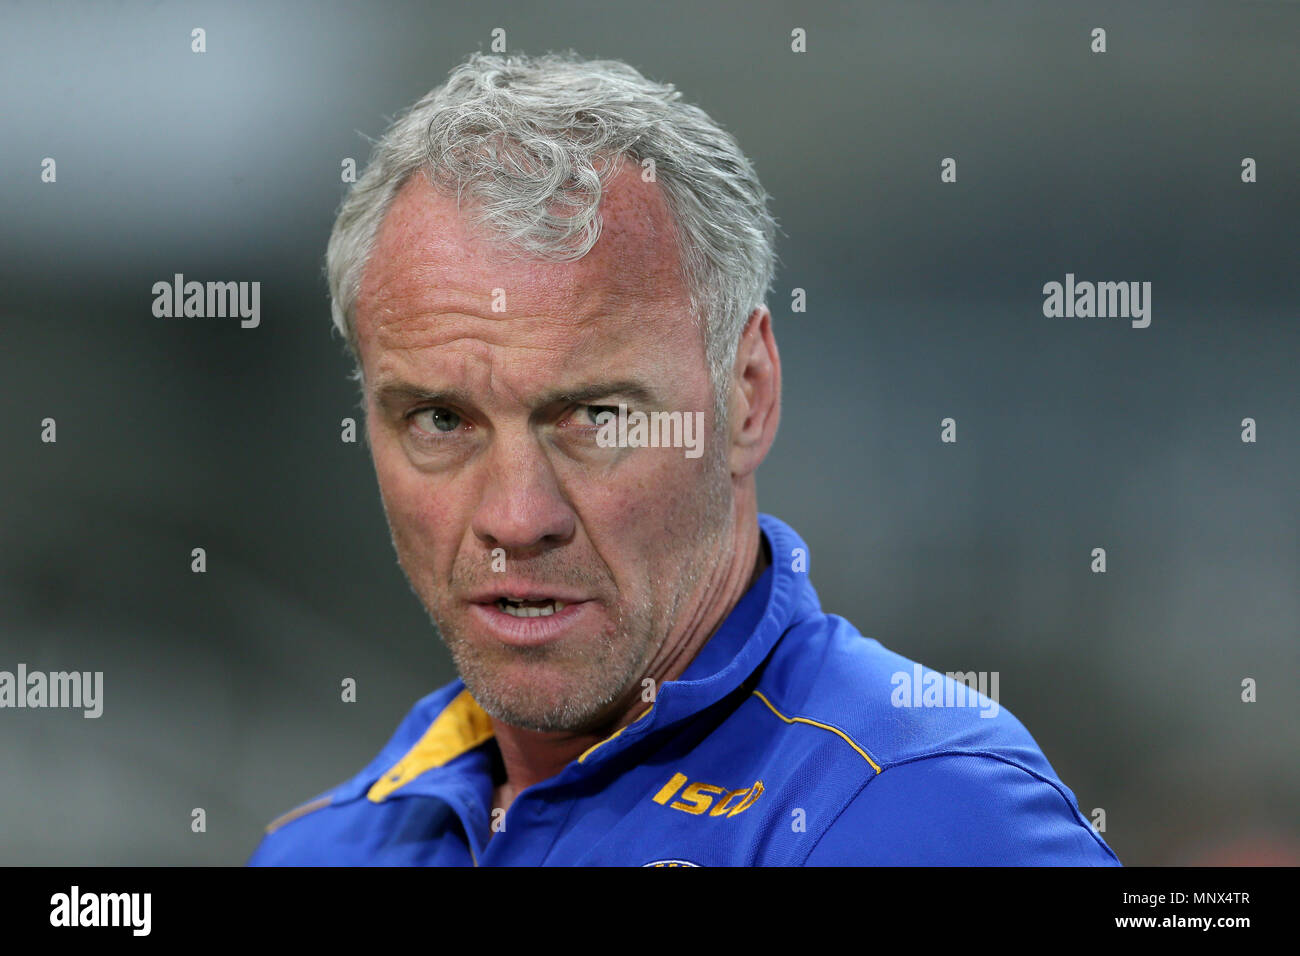 Leeds Rhino's head Coach Brian McDermott after the Betfred Super League, Magic Weekend match at St James' Park, Newcastle. PRESS ASSOCIATION Photo. Picture date: Saturday May 19, 2018. See PA story RUGBYL Castleford. Photo credit should read: Richard Sellers/PA Wire. RESTRICTIONS: Editorial use only. No commercial use. No false commercial association. No video emulation. No manipulation of images. Stock Photo